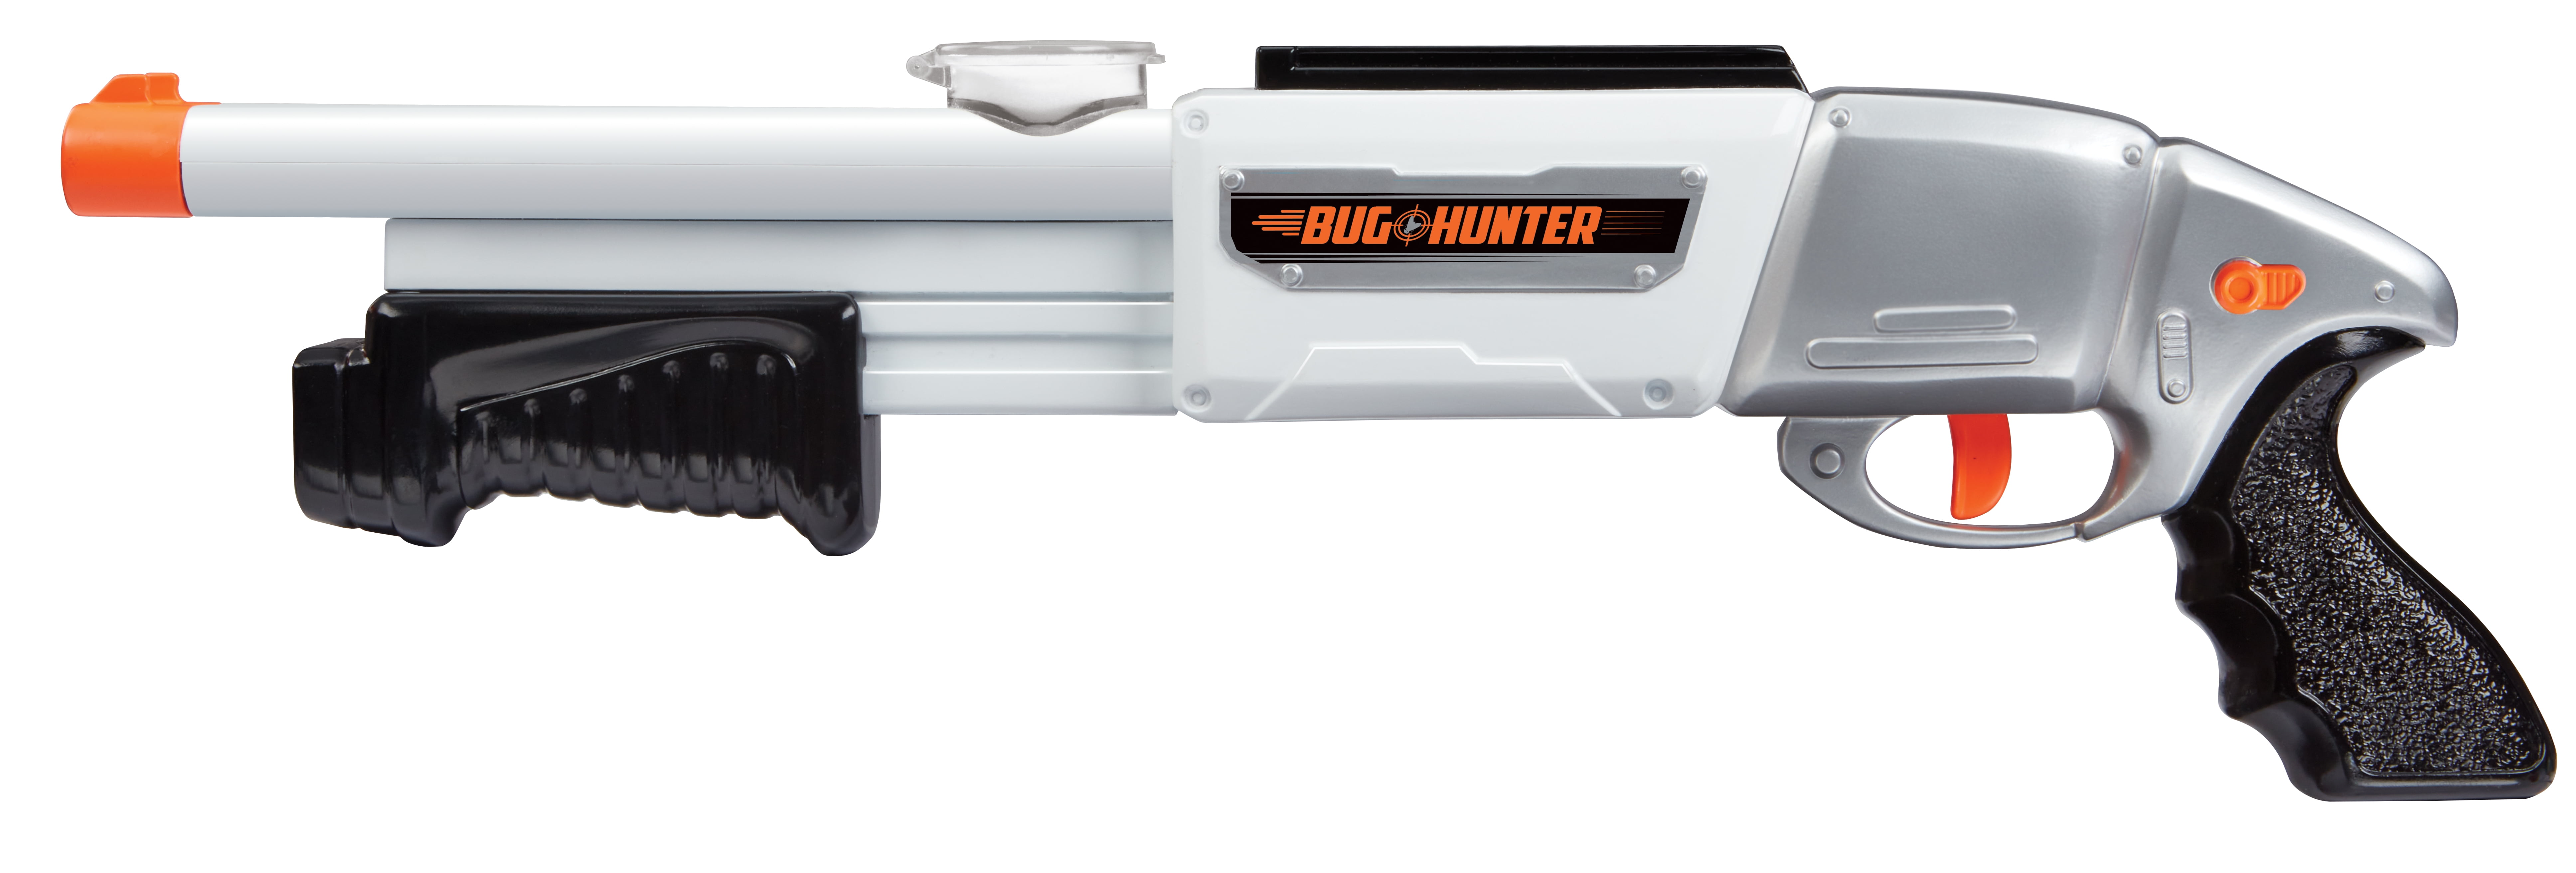 Air Warriors Bug Hunter Double Barrel Salt Blaster with Dual Stage Trigger